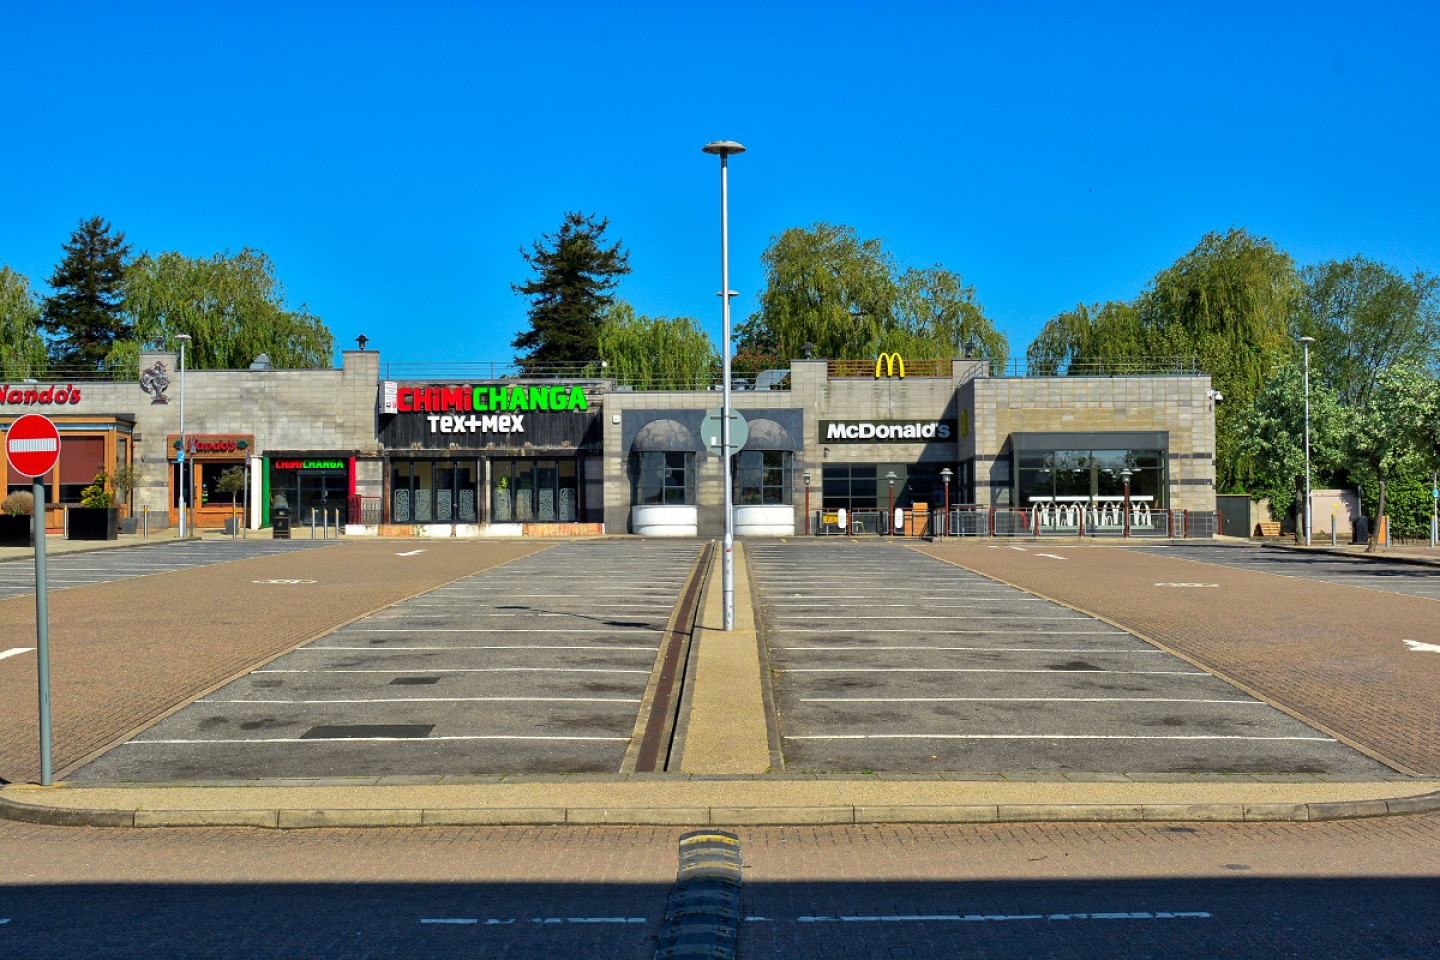 Finchley Lido Leisure Centre, London N12. A car park chock-a-block with empty spaces and closed retail and leisure outlets. 26 April, 11.07am.  © George Demetri